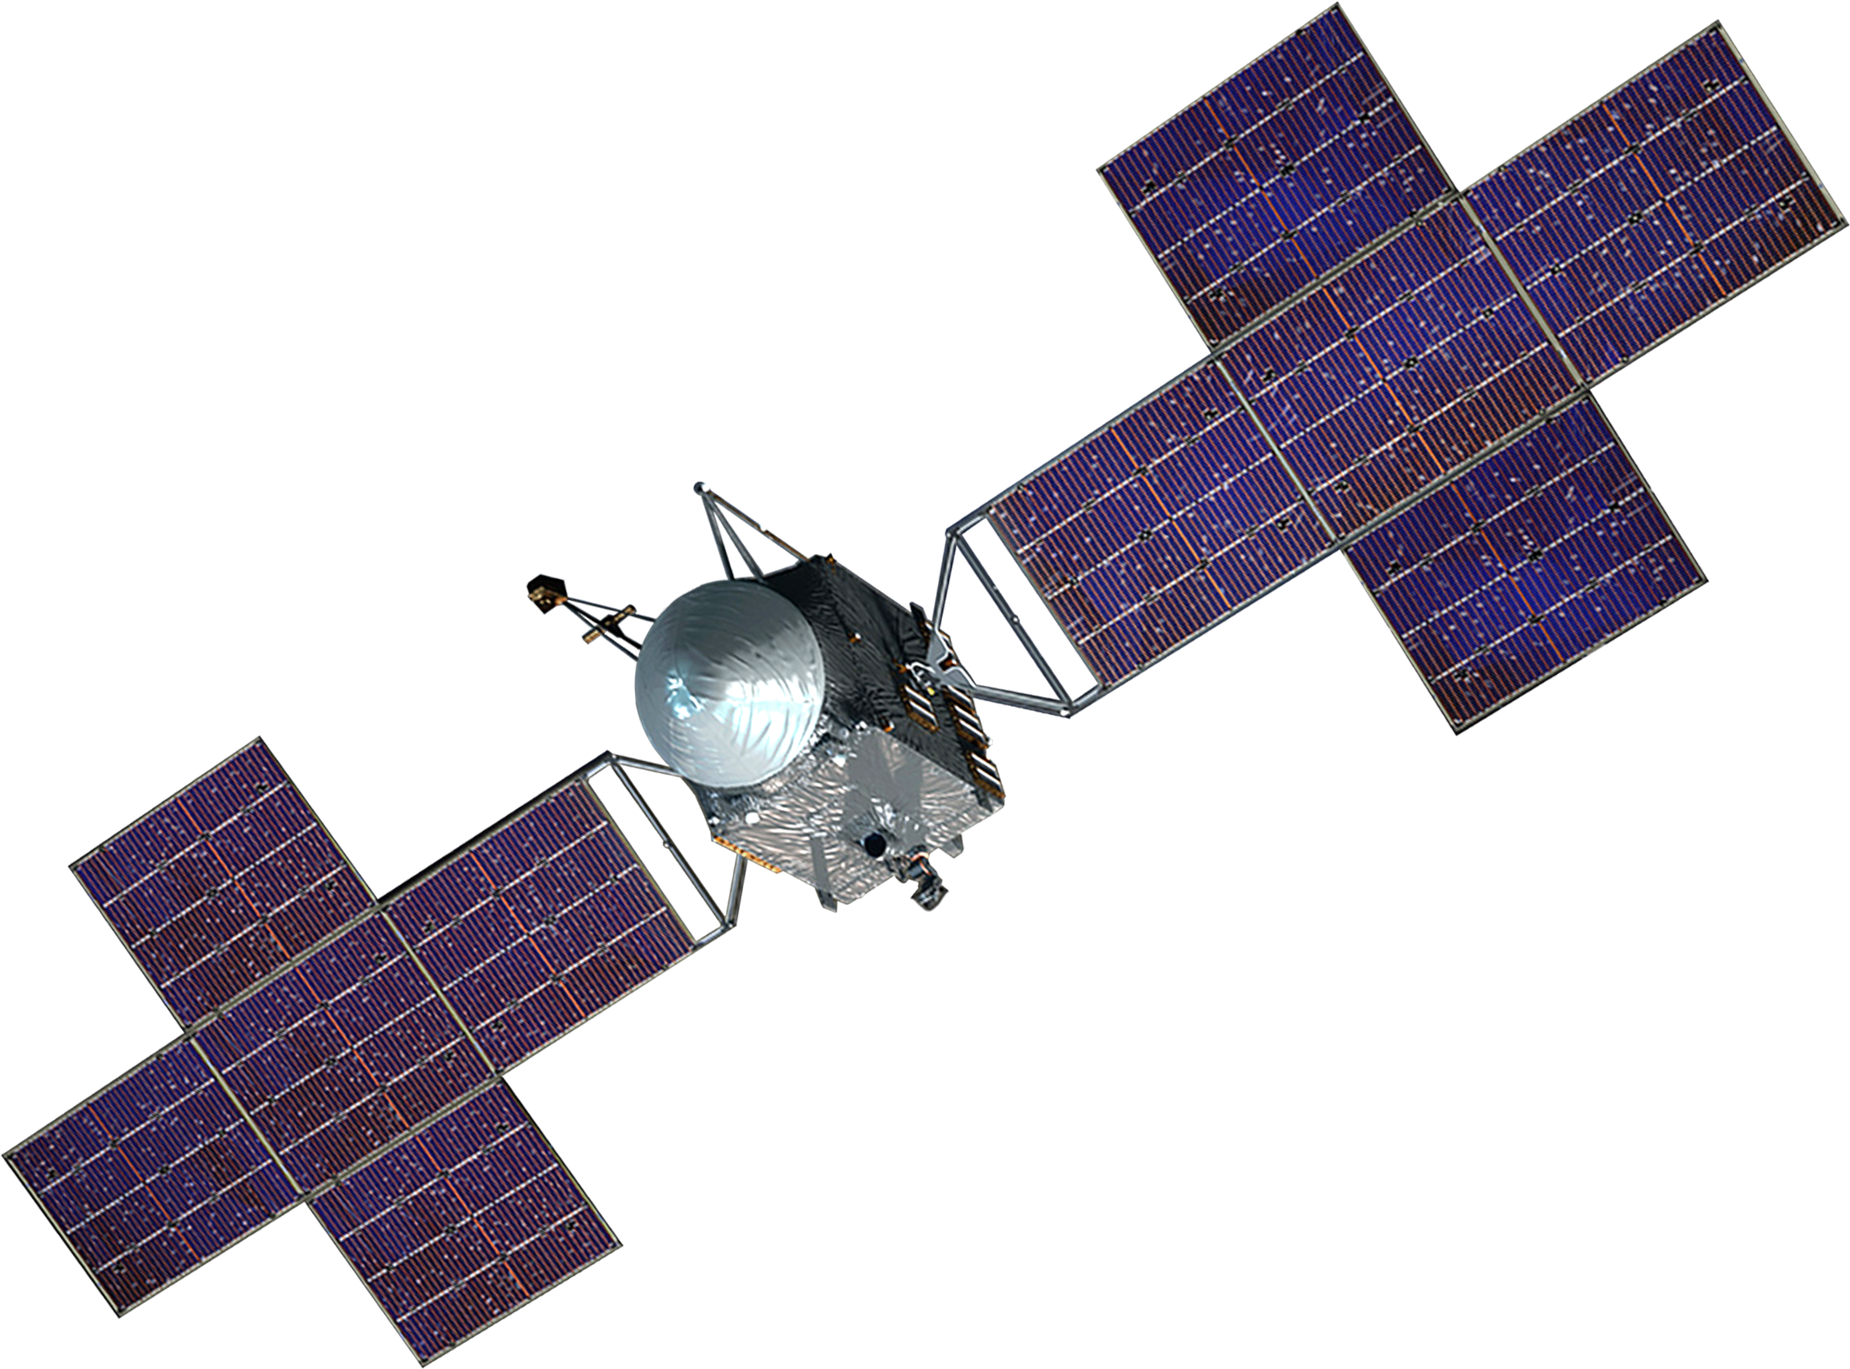 Illustration of the Psyche spacecraft with outstretched solar panels.